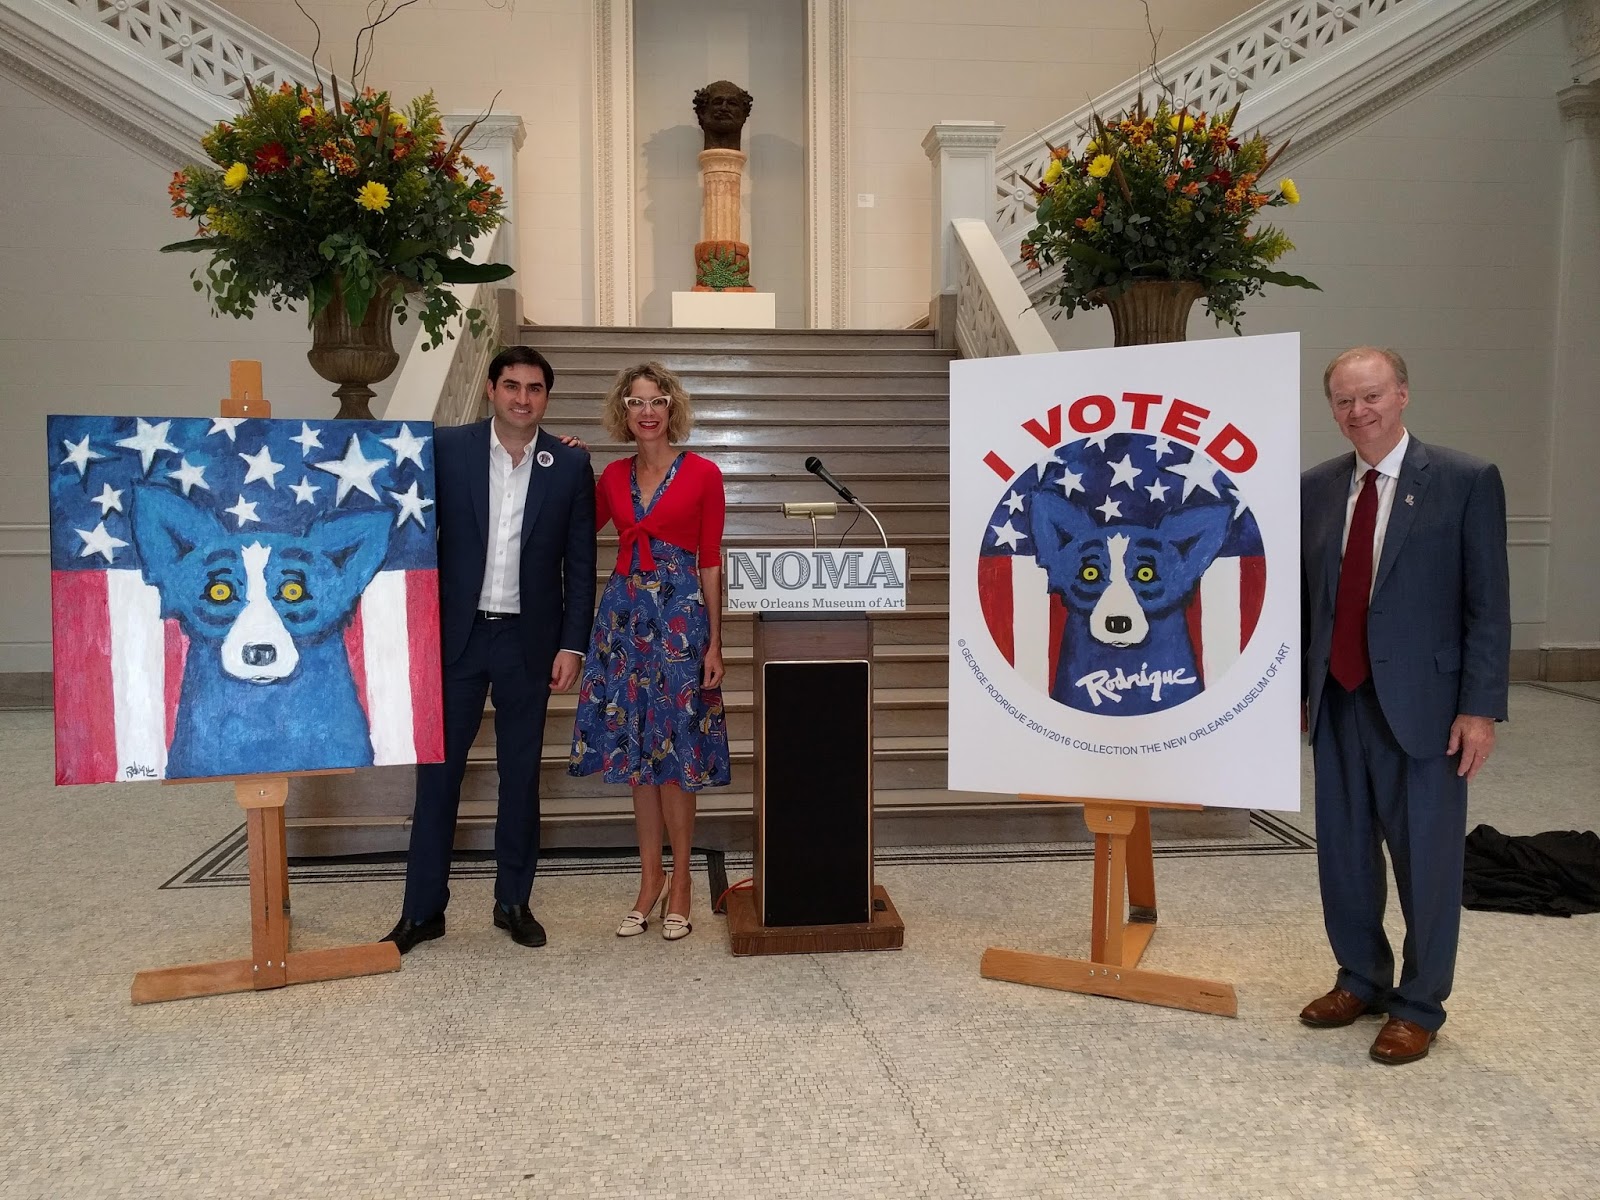 George Rodrigue Foundation News: Rodrigue Family Unveils &quot;I VOTED&quot; Blue Dog Sticker